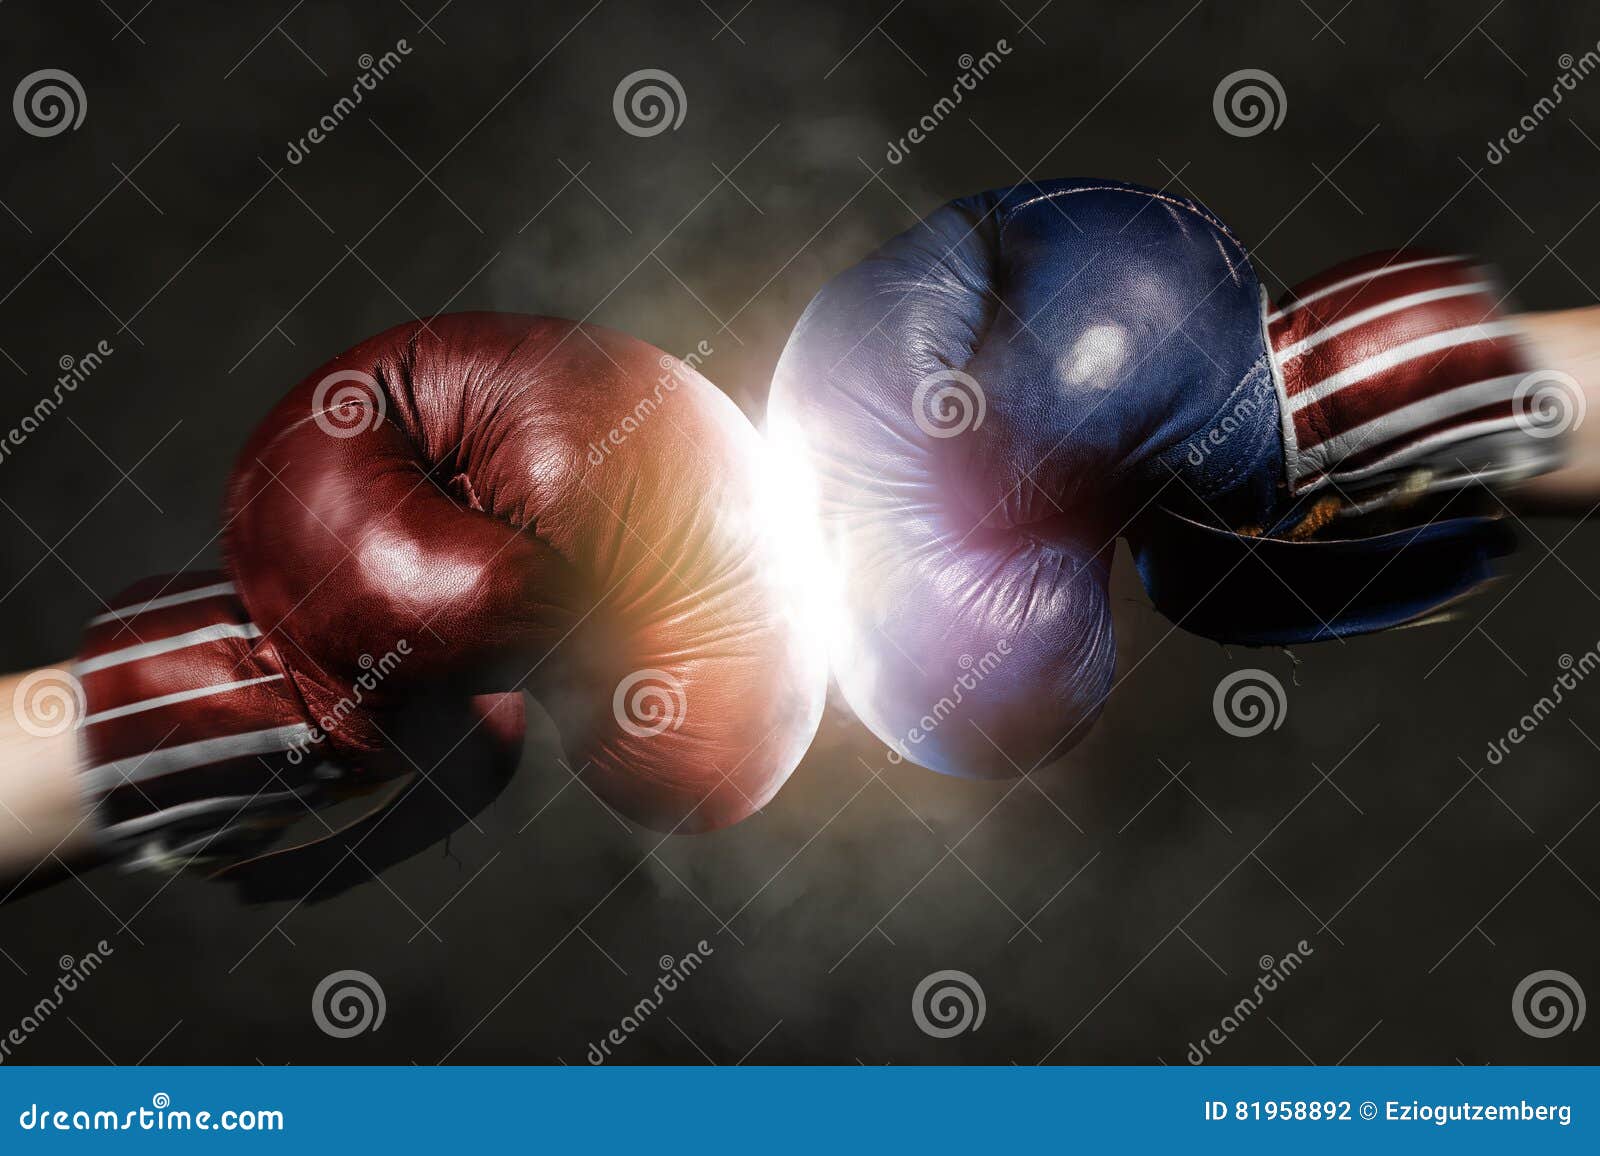 republicans and democrats in the campaign ized with boxing